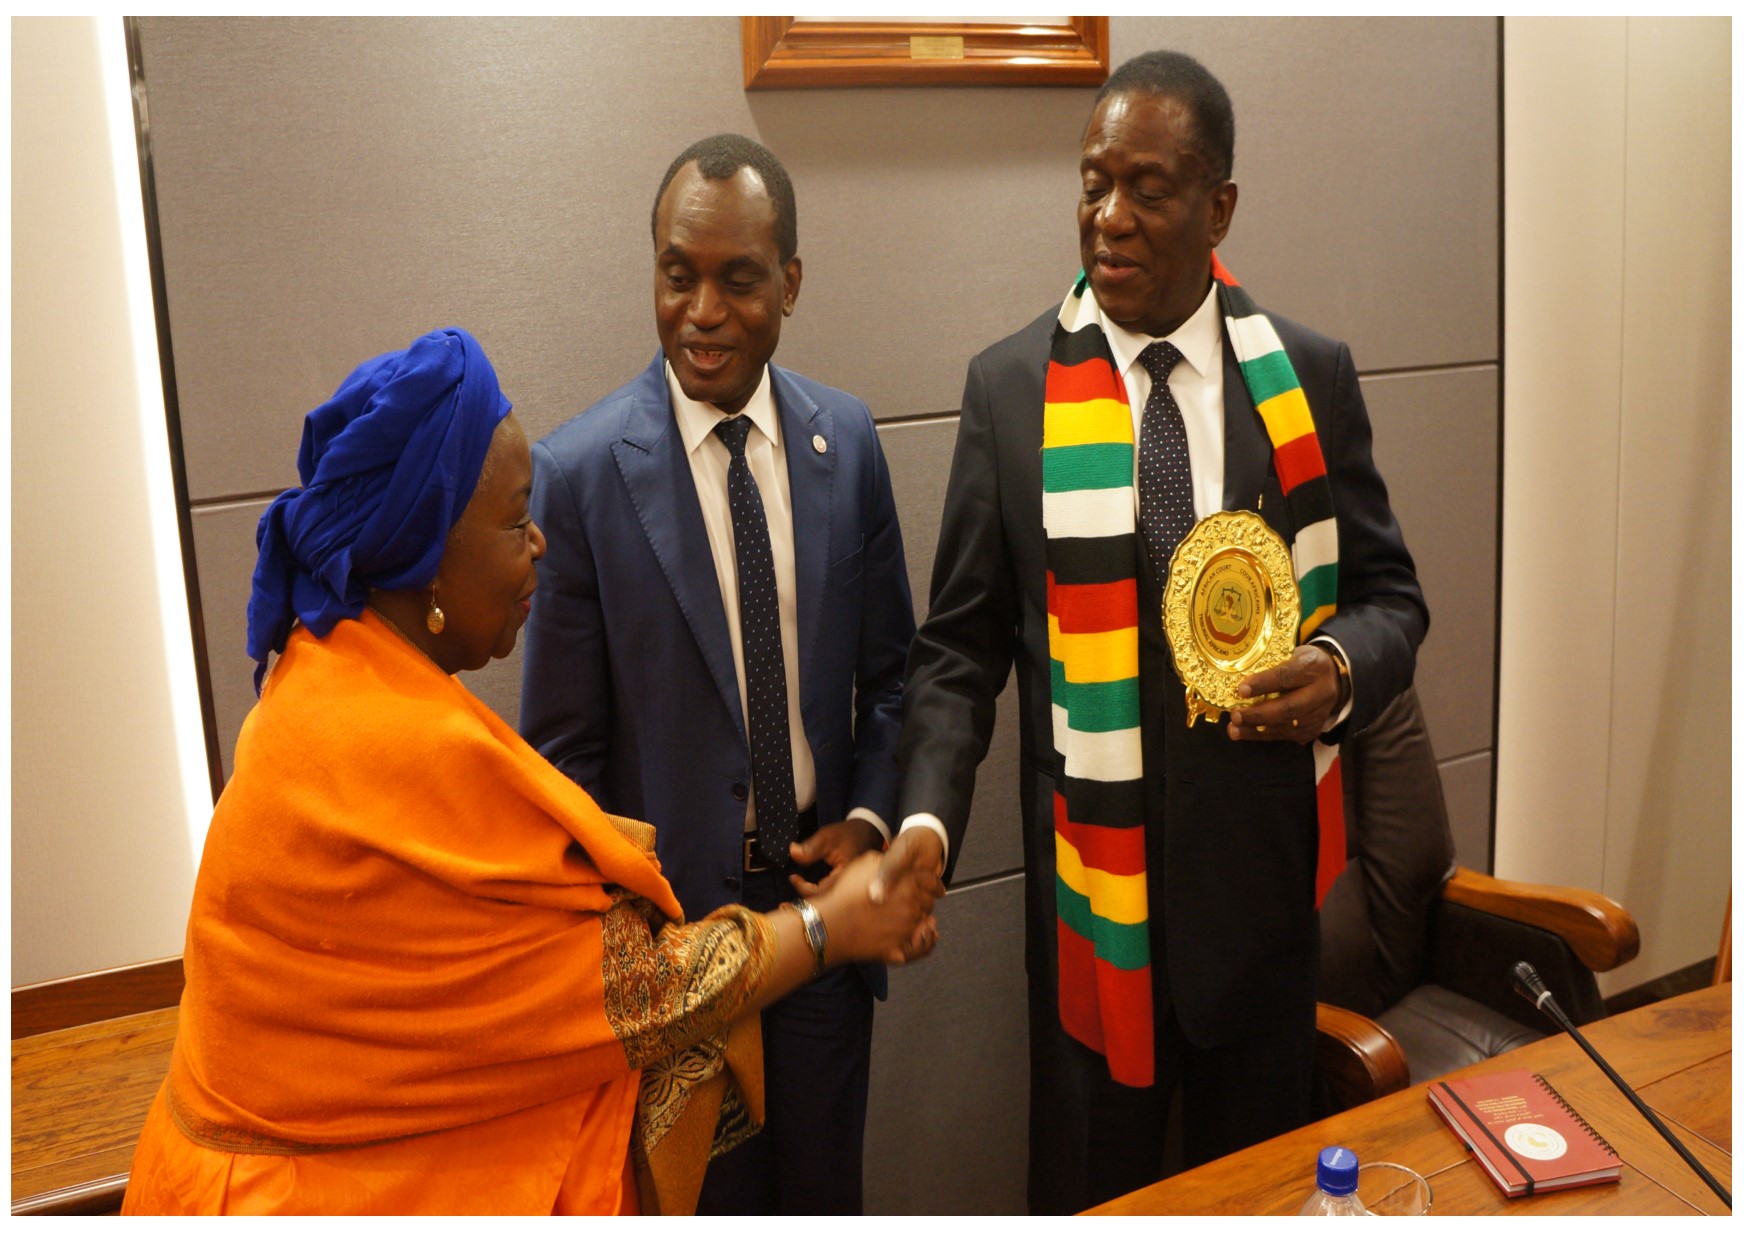 Zimbabwe's President Mnangawa greets a Judge of the Court Justice Hon Justice Tujilane Rose Chizumila after receiving a plaque from the Court's President Hon Justice Sylvain Oré (m).